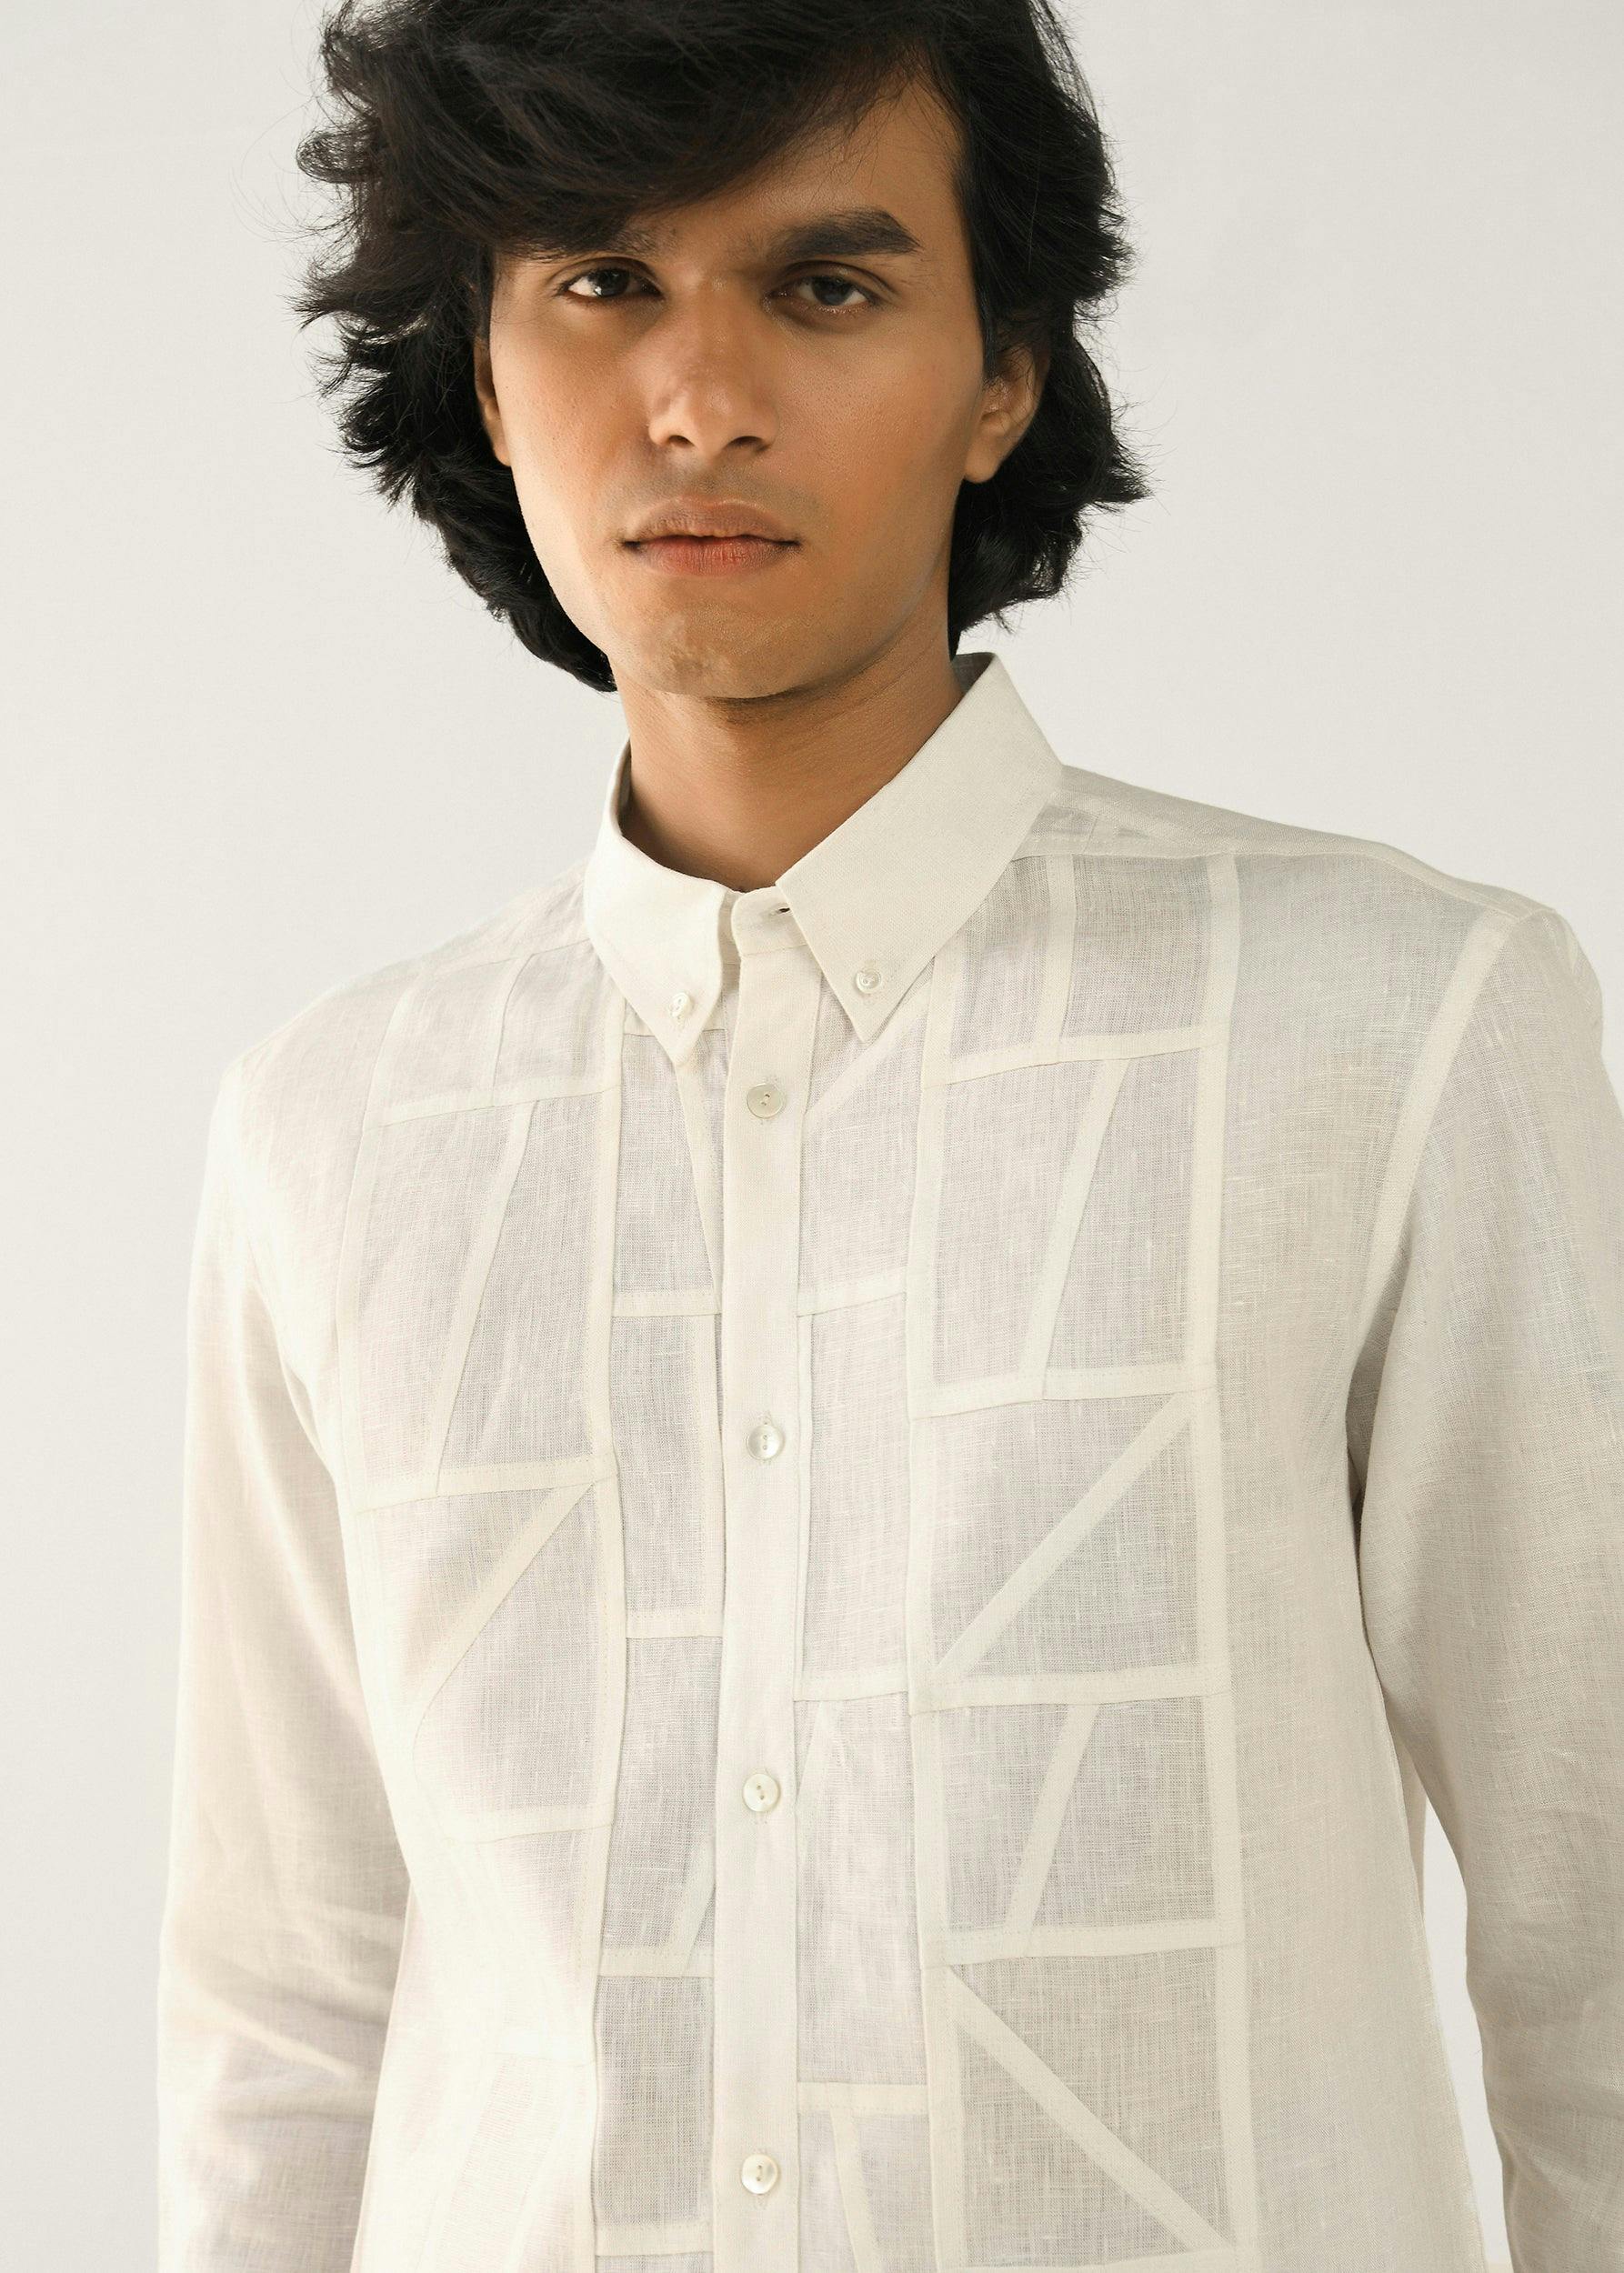 Bojagi Shirt, a product by Country Made